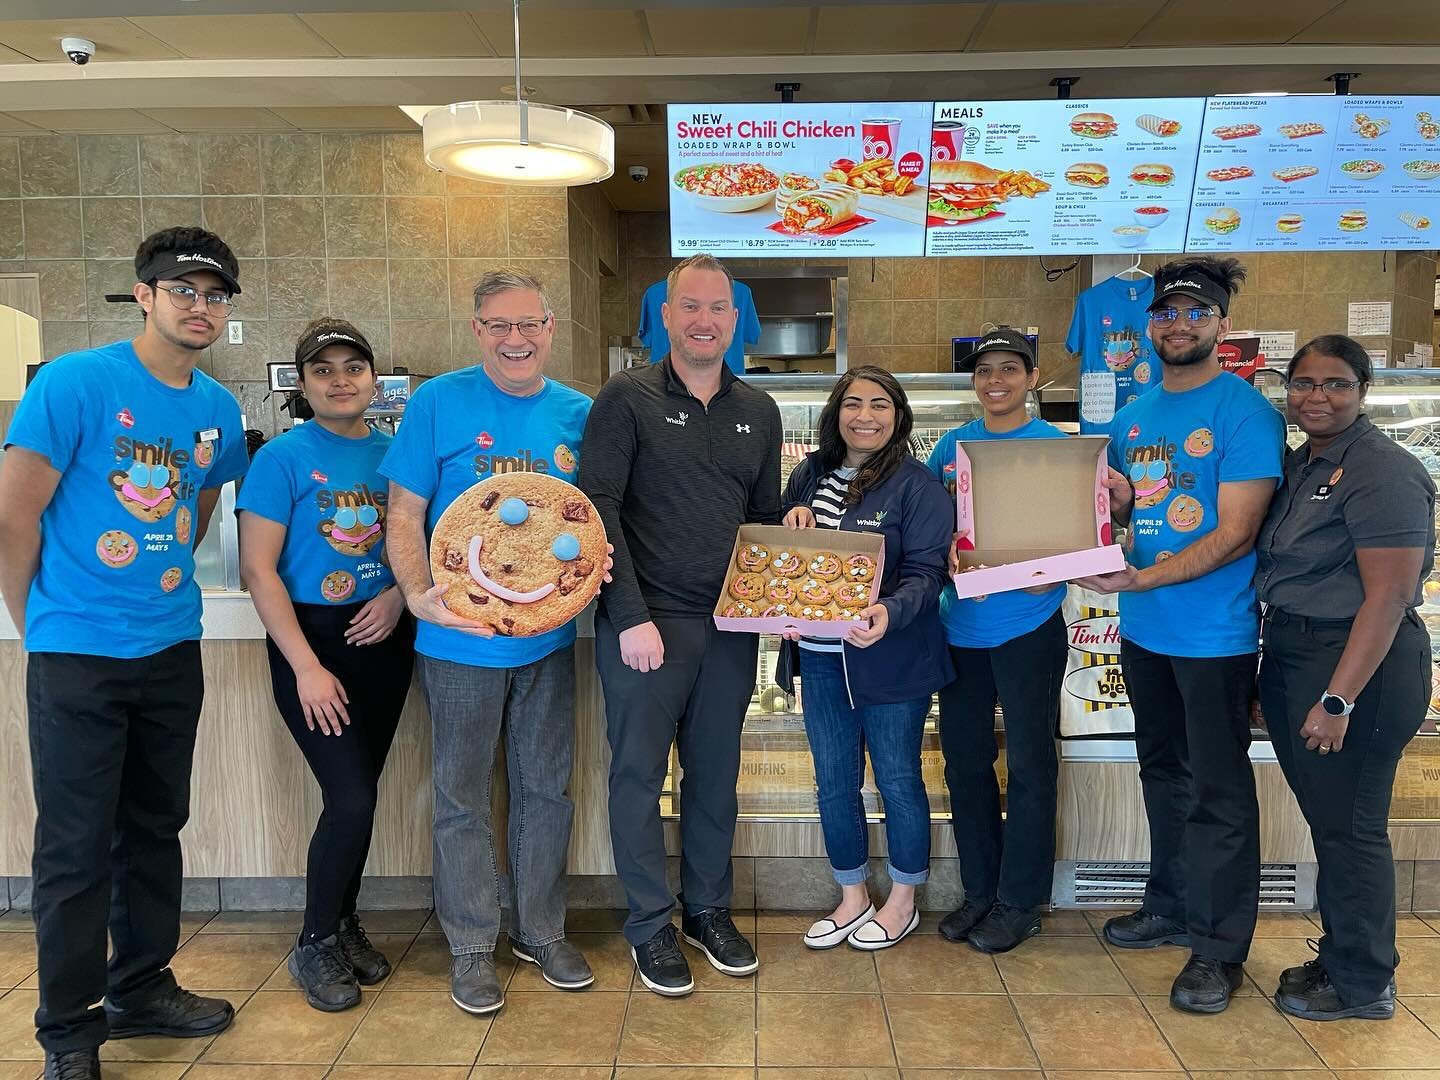 Whitby, Let&rsquo;s push this further from now until Sunday May 5th let&rsquo;s win the #SmileCookie campaign for Ontario Shores Foundation for Mental Health. #SmileCookie @therealkevinfrankish @timhortons